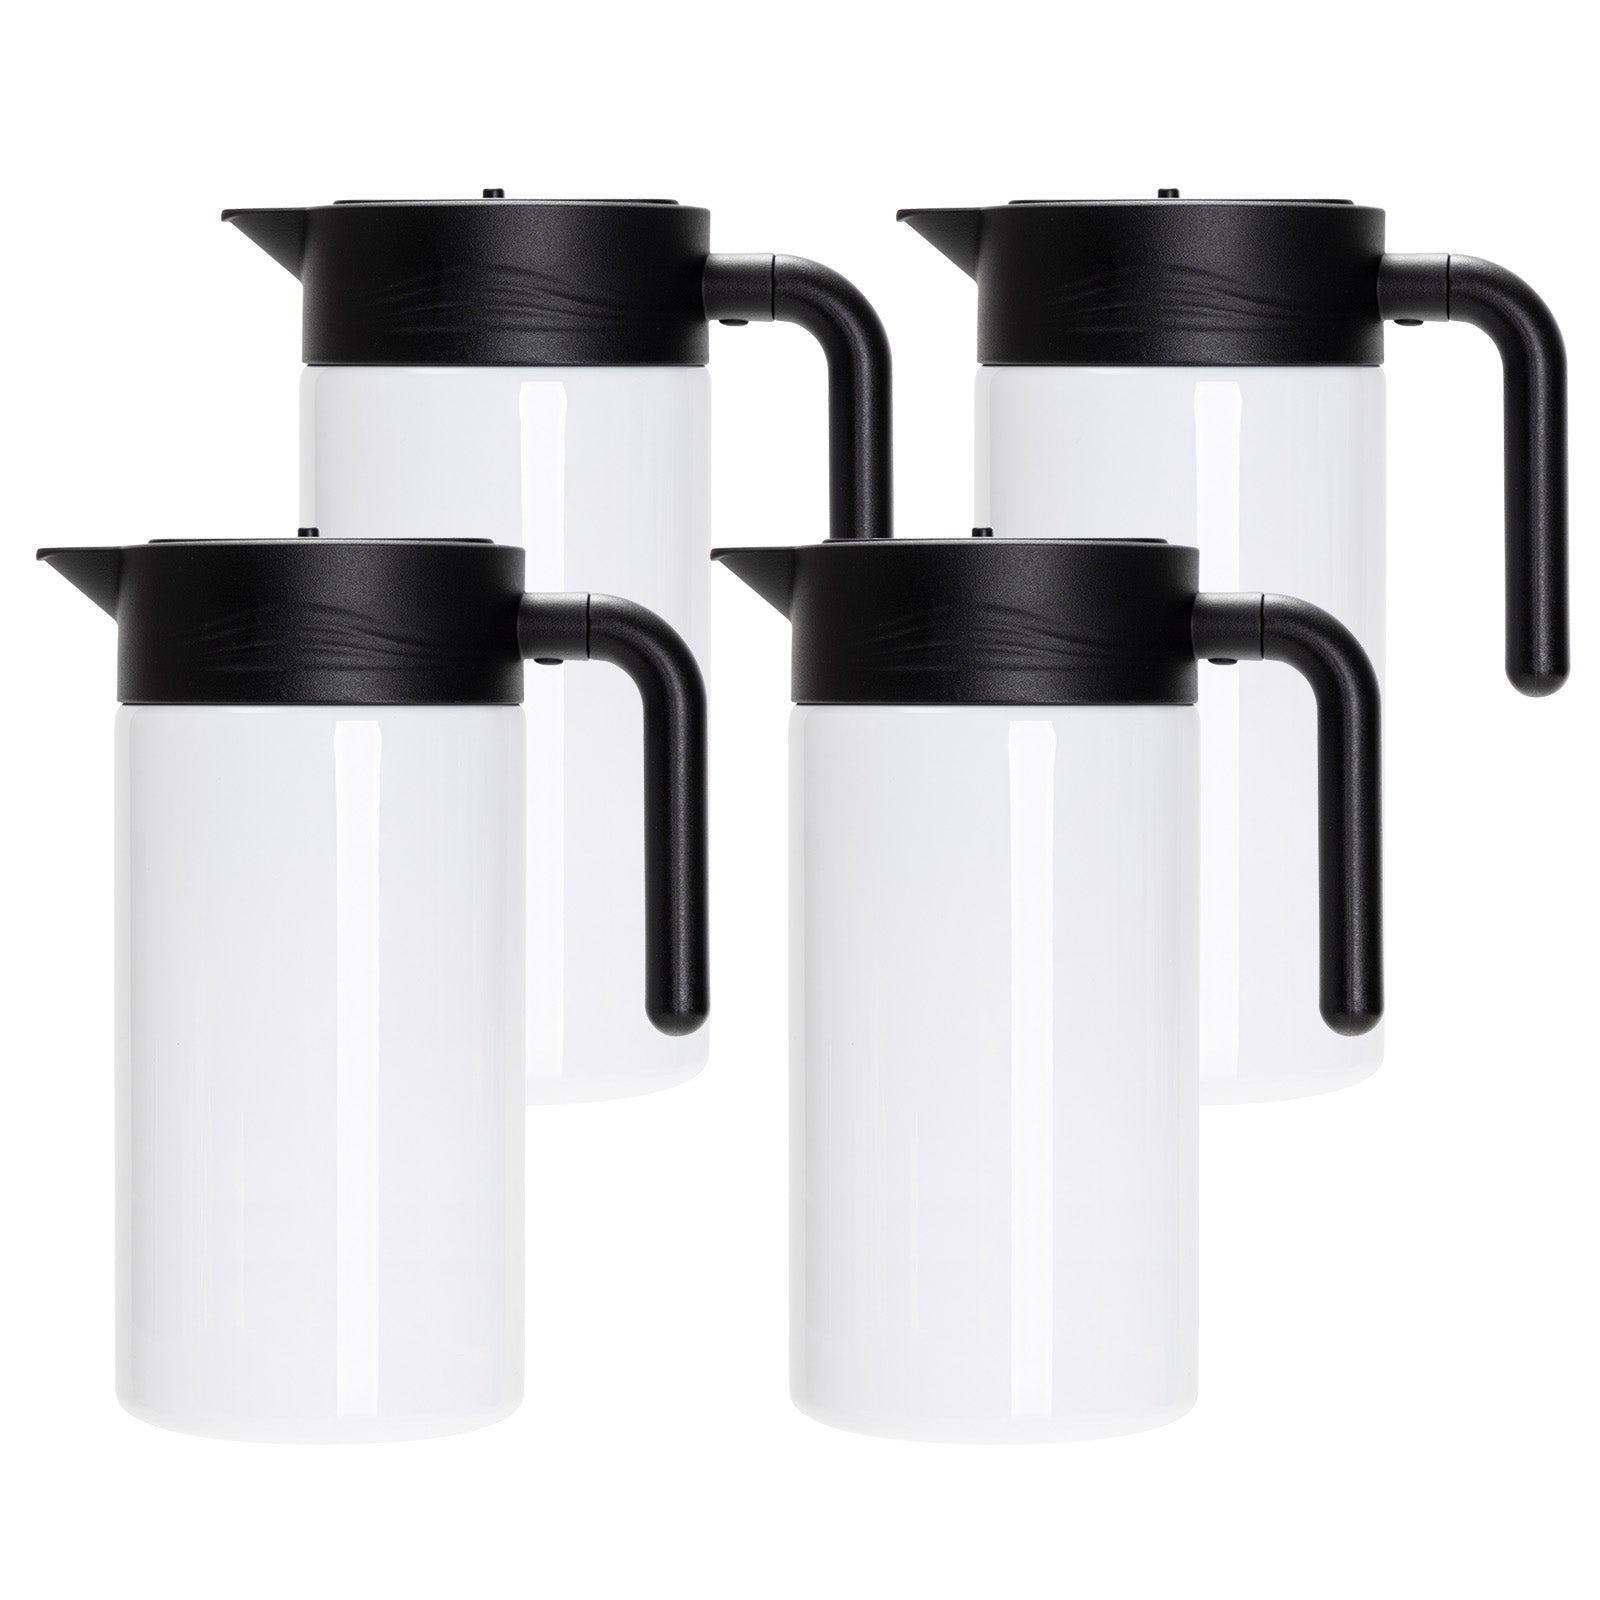 PYD Life Thermal Carafe Sublimation Blanks Coffee Pot 32 oz White Large 1 Liter Stainless Steel Double Wall Vacuum Insulated Flask for Sublimation